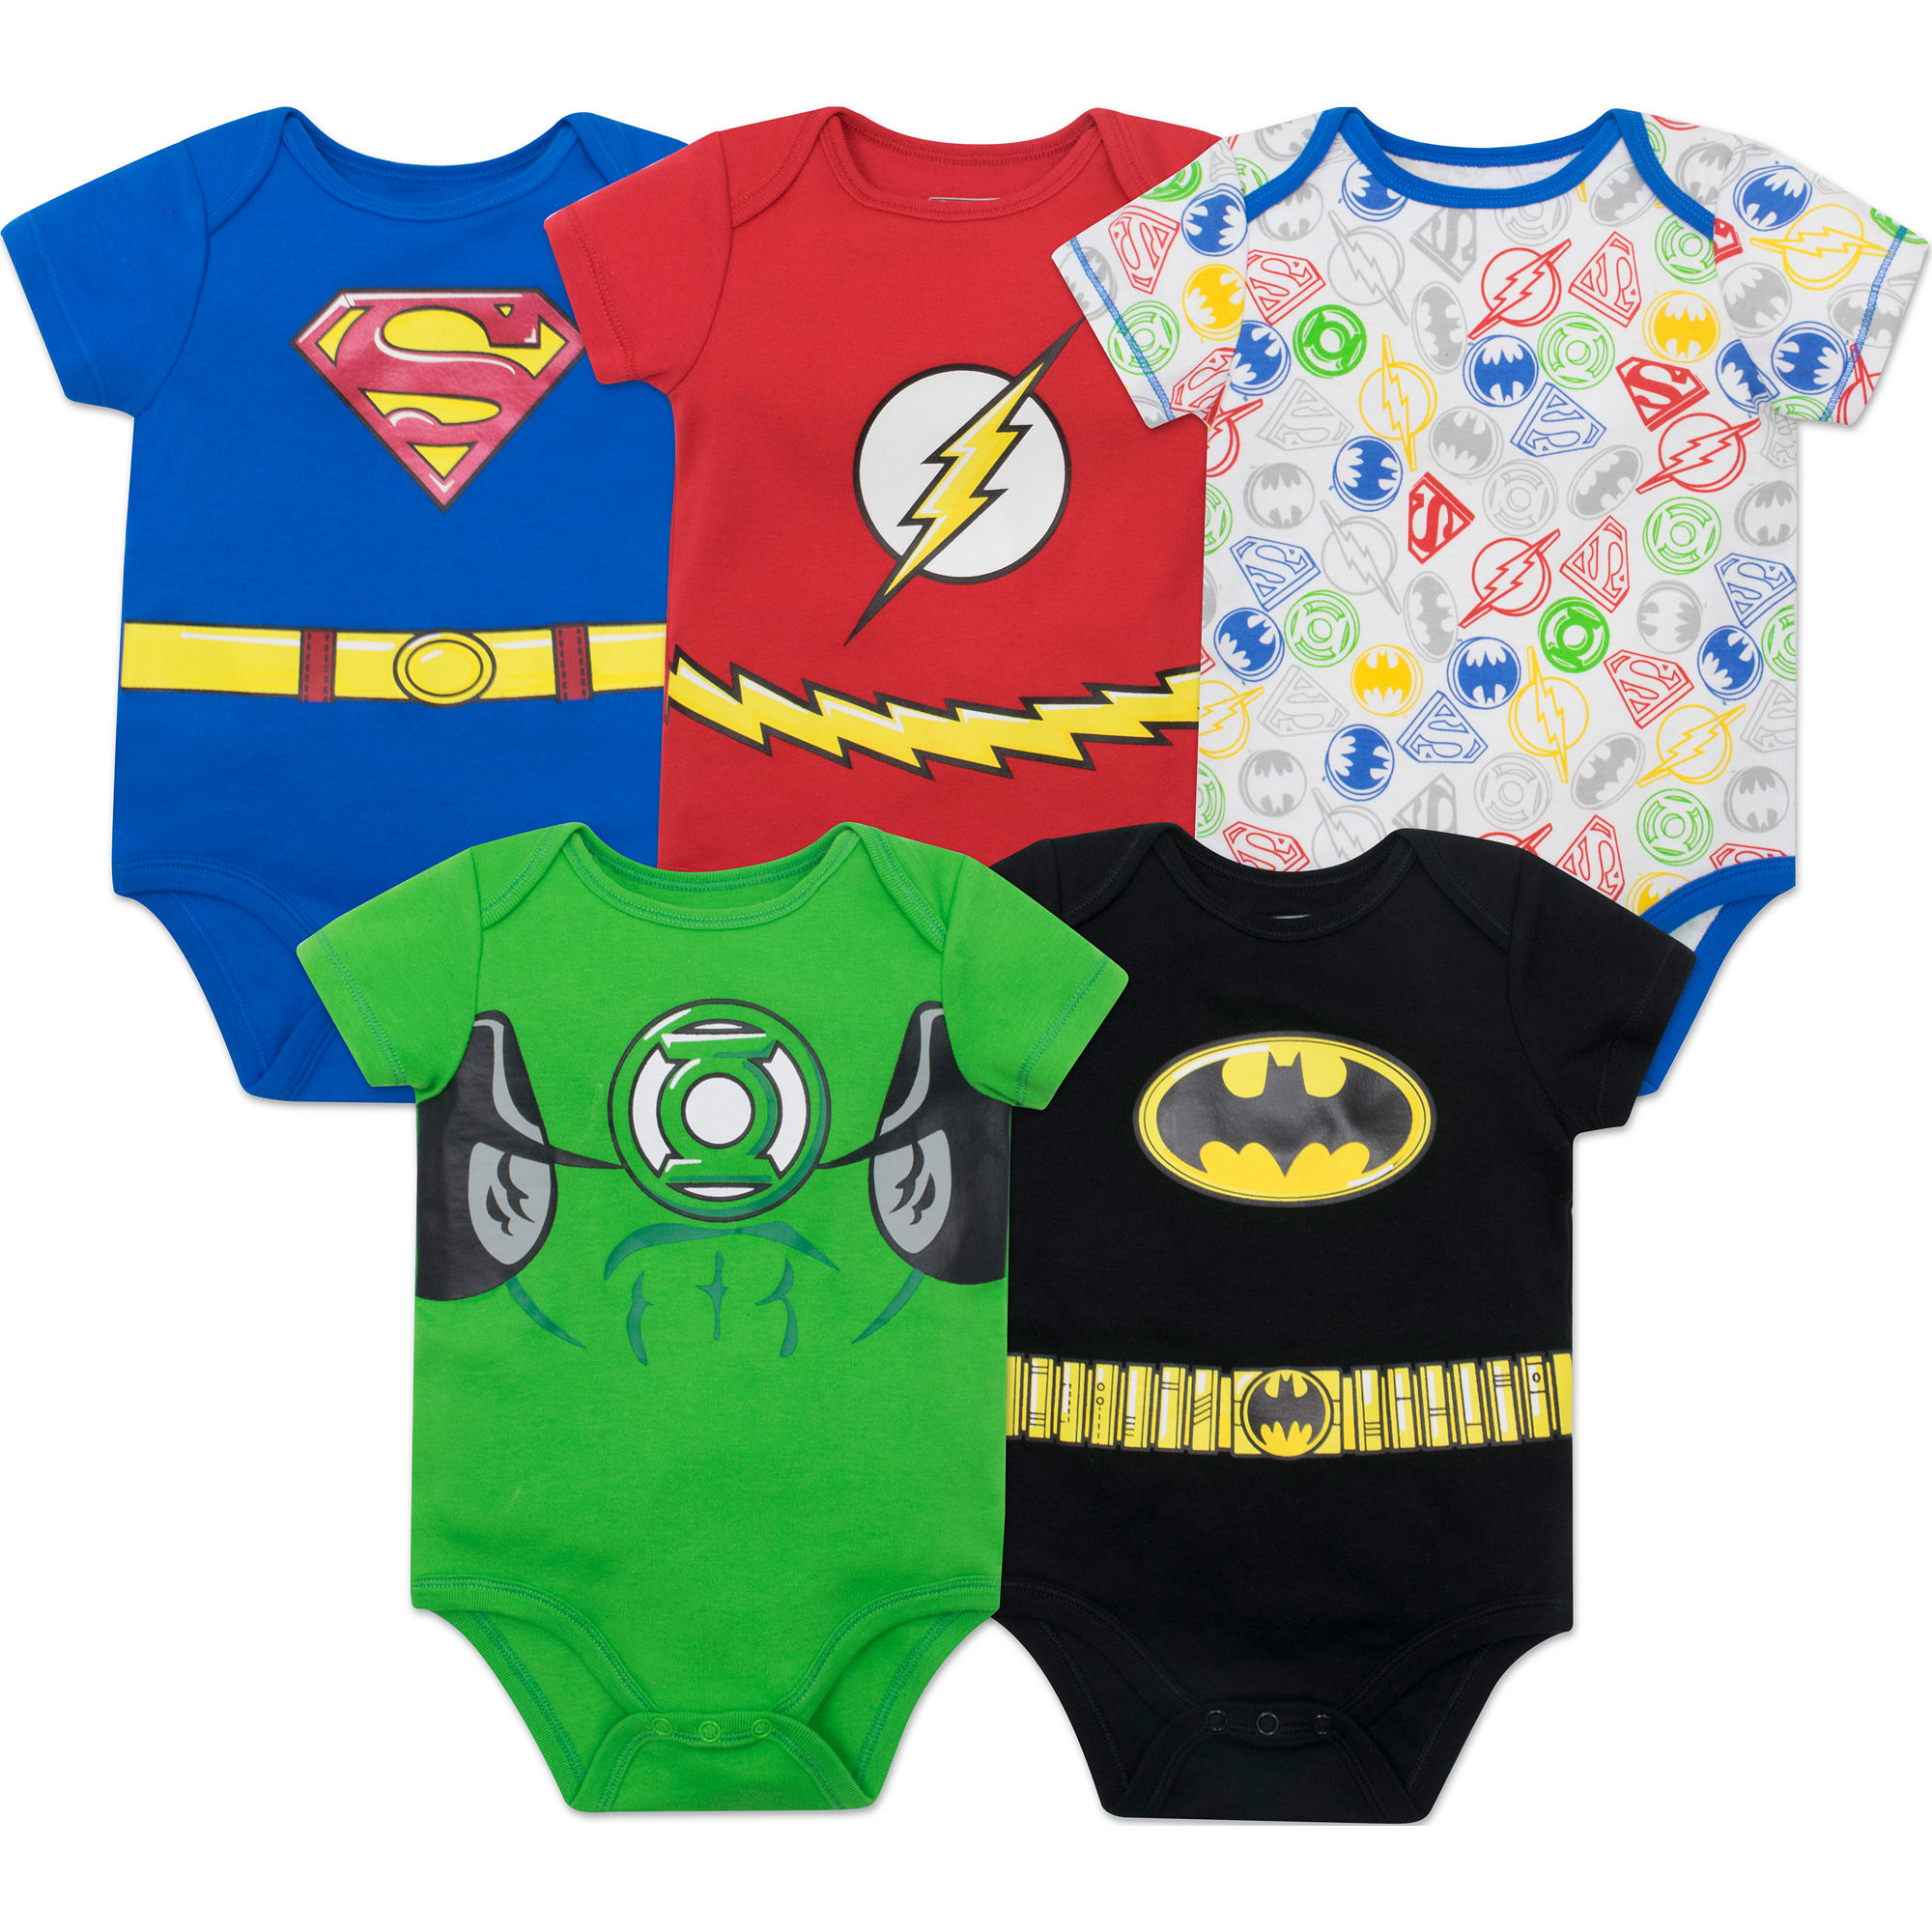 UPC 024054726075 product image for Justice League Bodysuit - Baby | upcitemdb.com